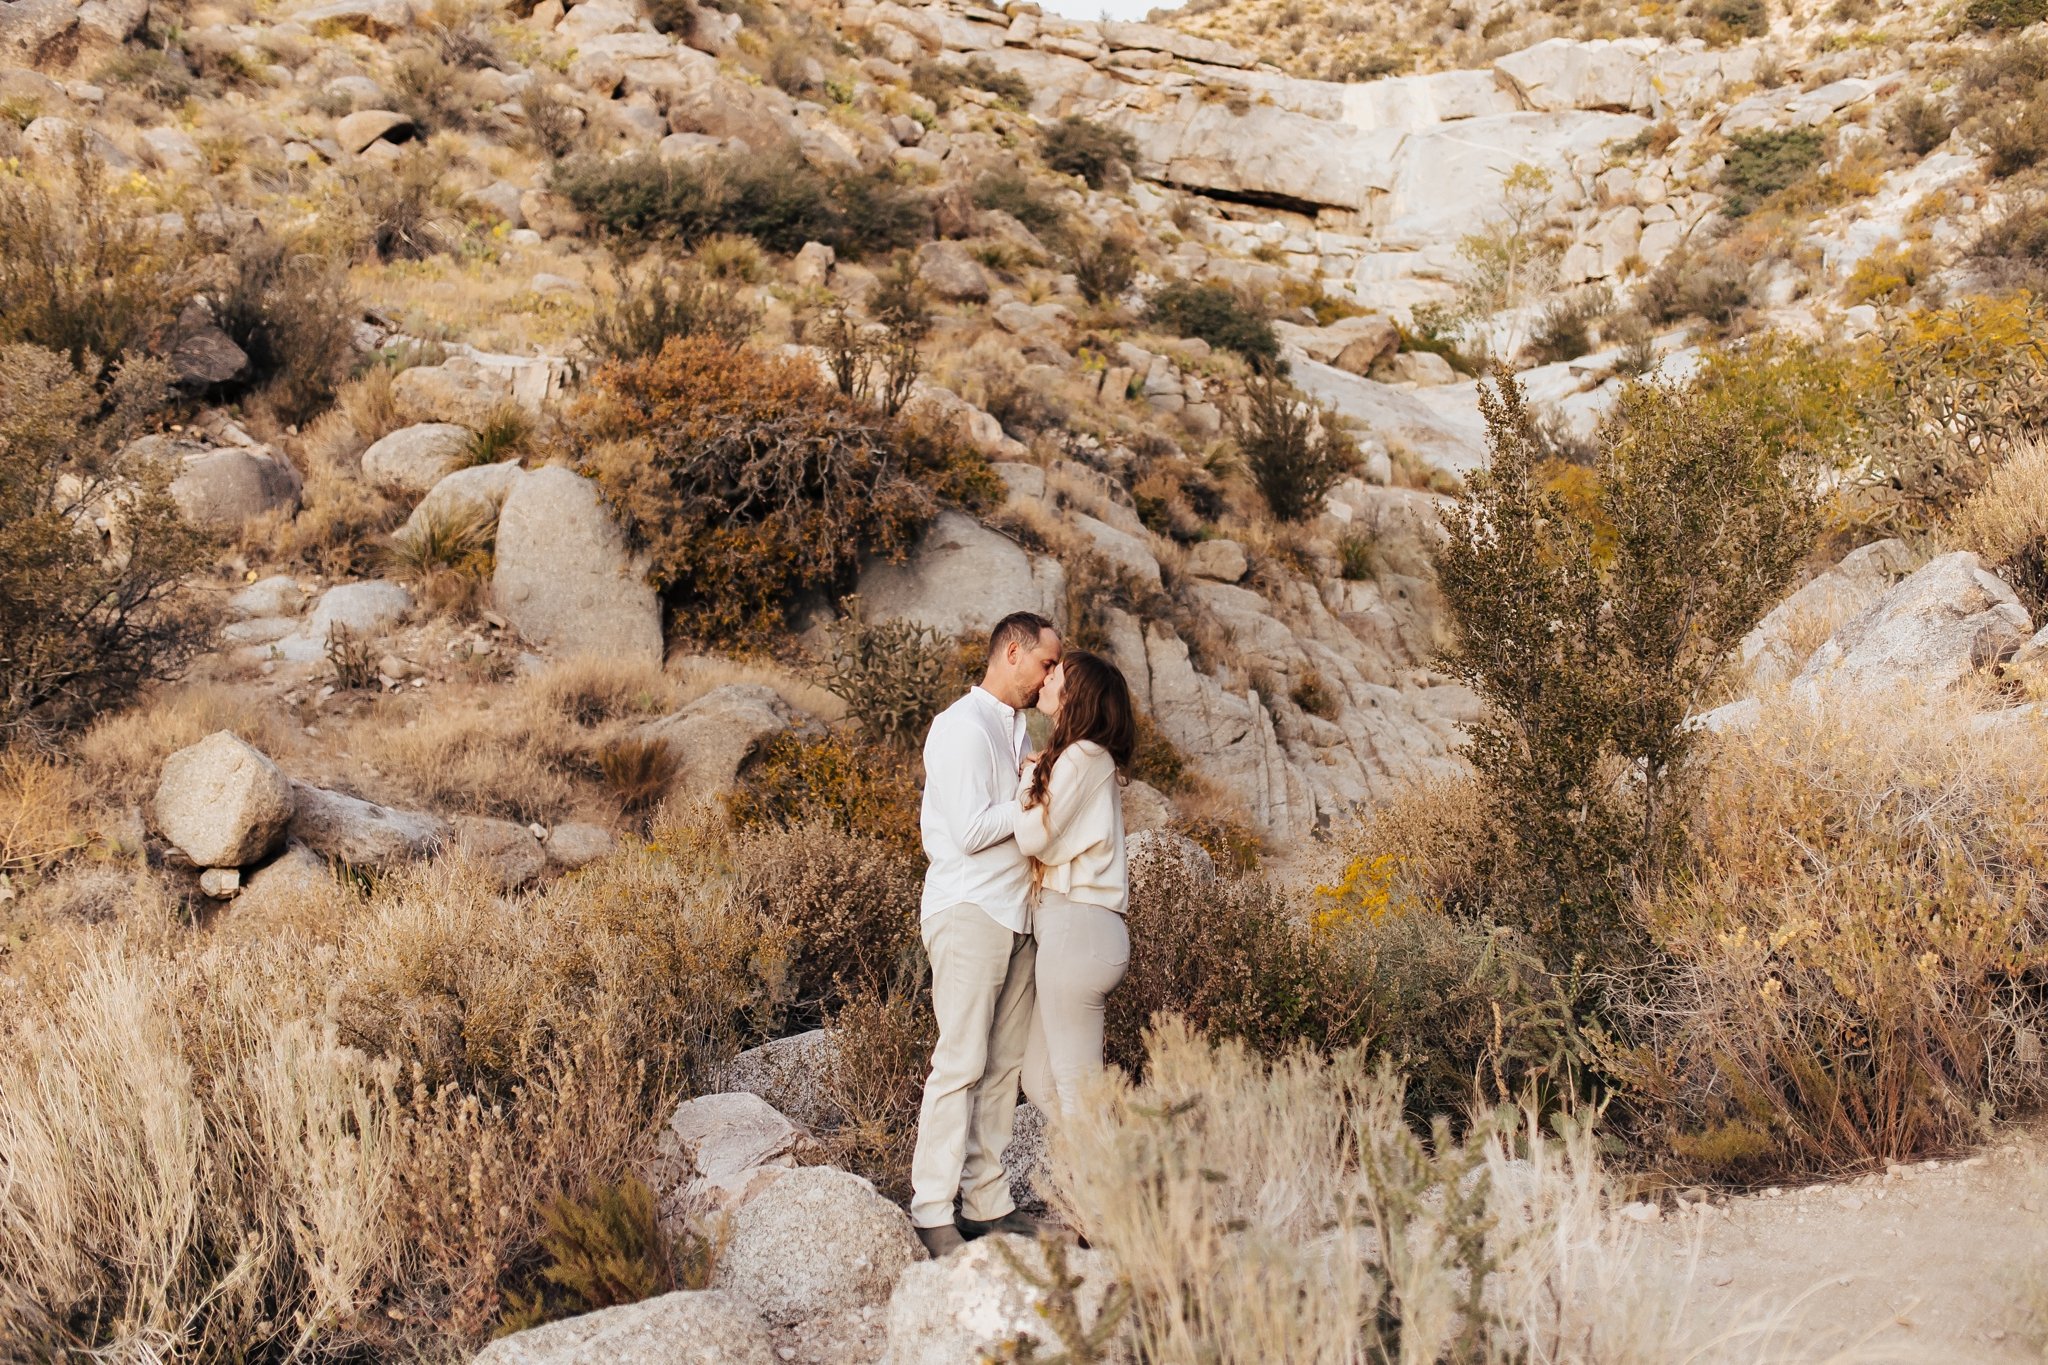 Alicia+lucia+photography+-+albuquerque+wedding+photographer+-+santa+fe+wedding+photography+-+new+mexico+wedding+photographer+-+new+mexico+wedding+-+desert+engagement+-+foothills+engagement+-+mountain+engagement_0042.jpg